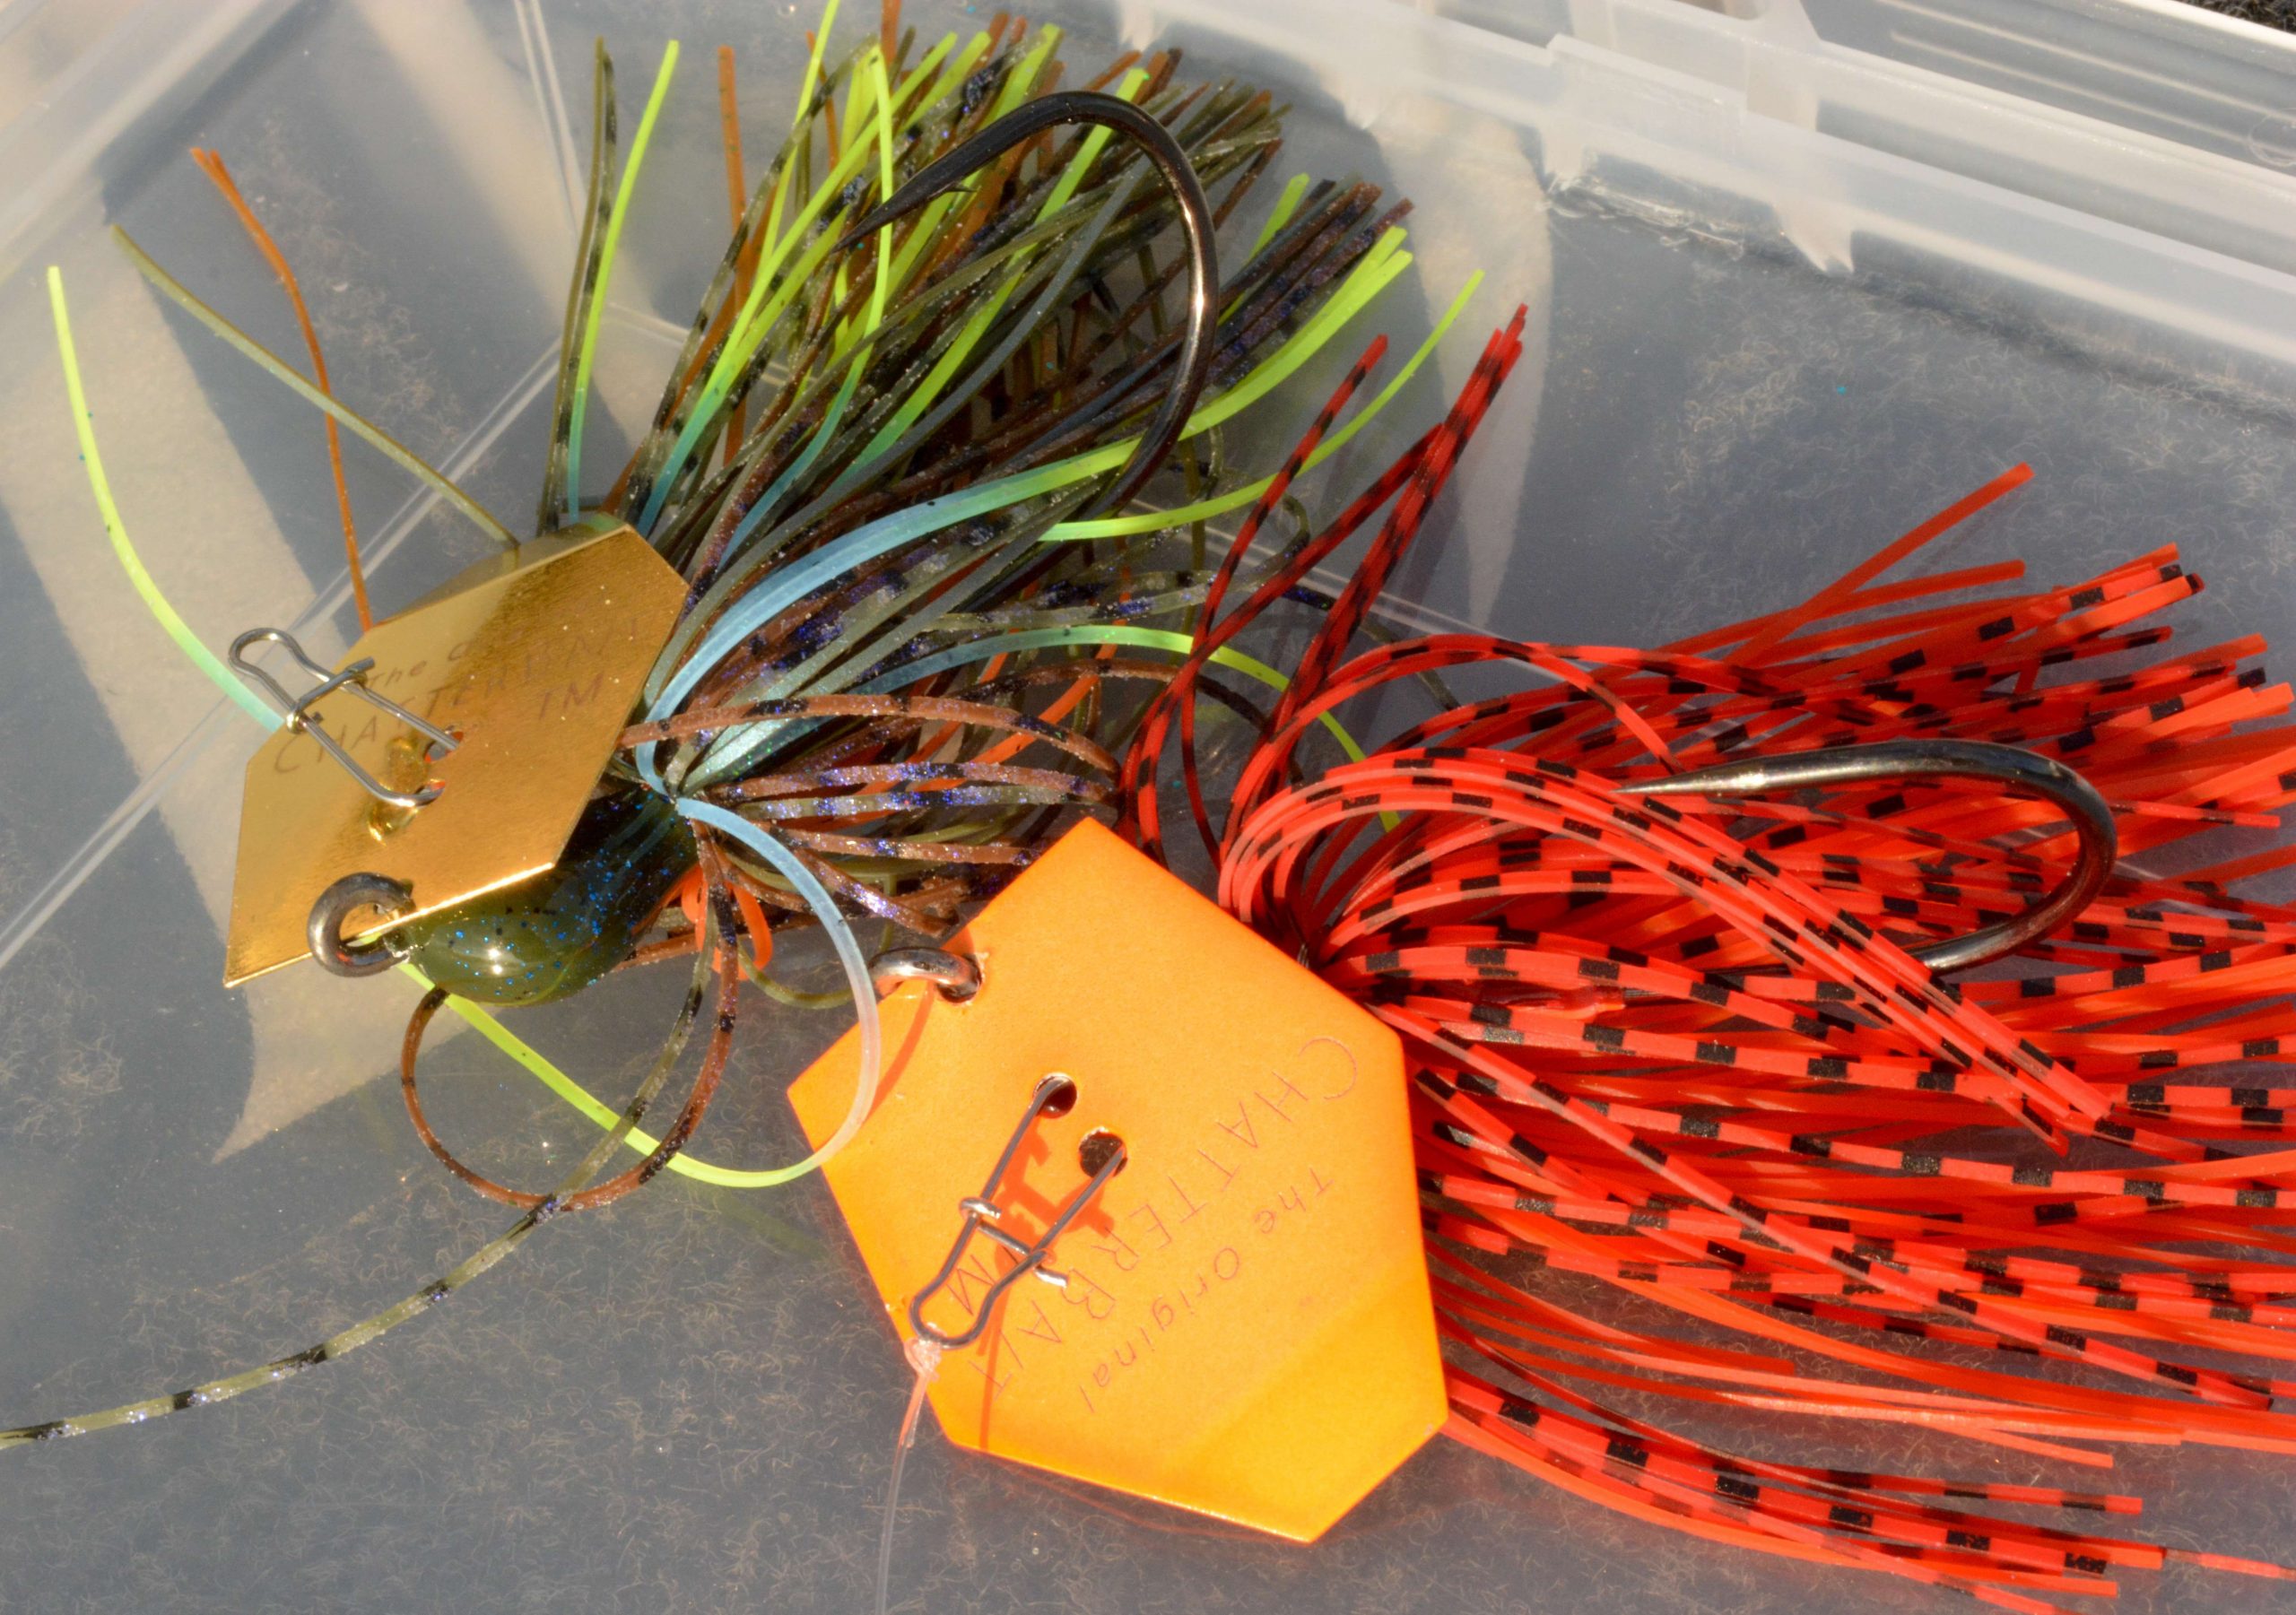 Another look, including the red hot Fire Craw pattern (foreground).